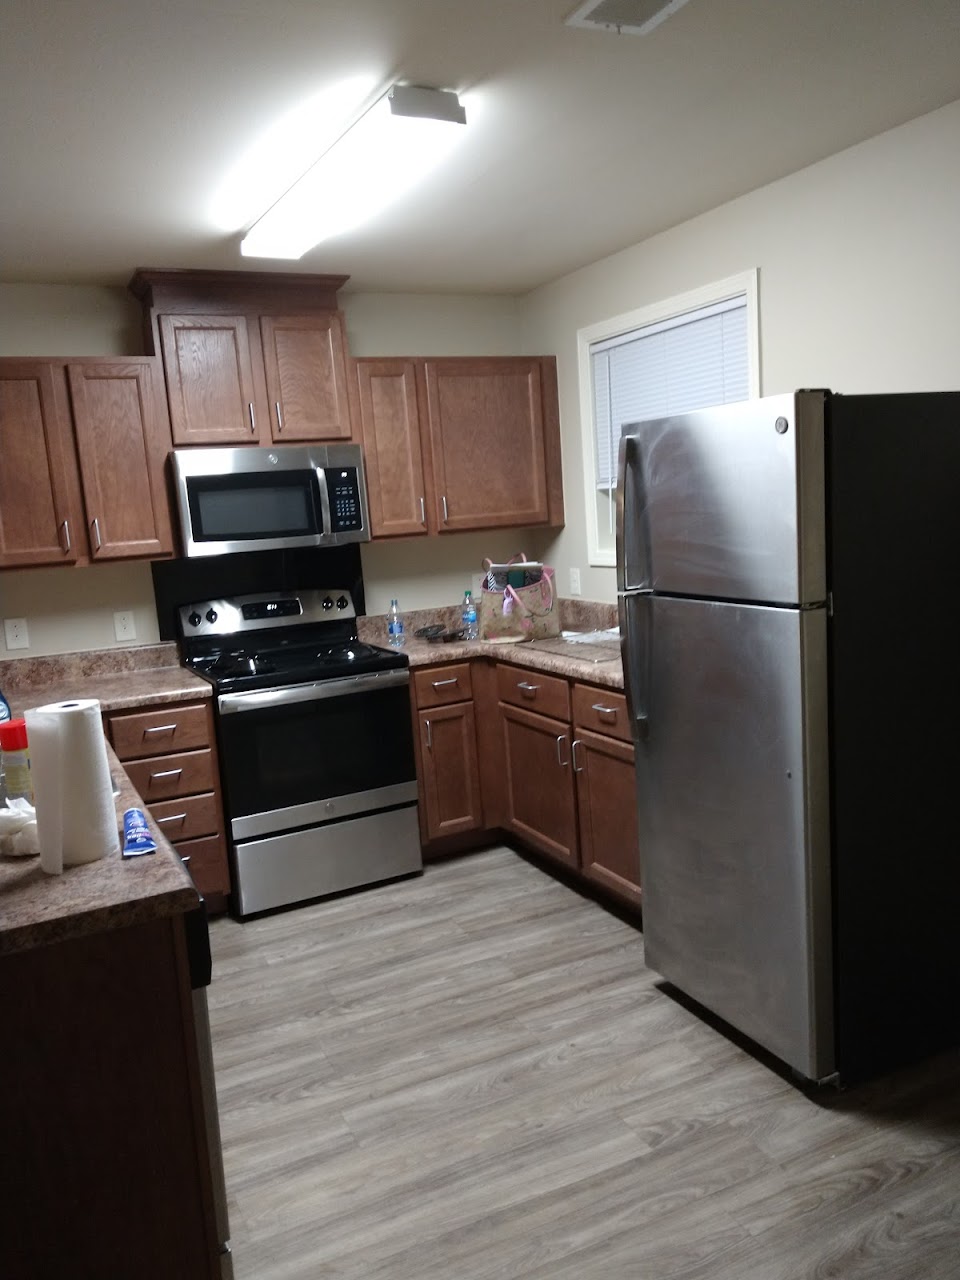 Photo of WINDMERE PLACE. Affordable housing located at 10 WINDMERE LOOP DUNLAP, TN 37327